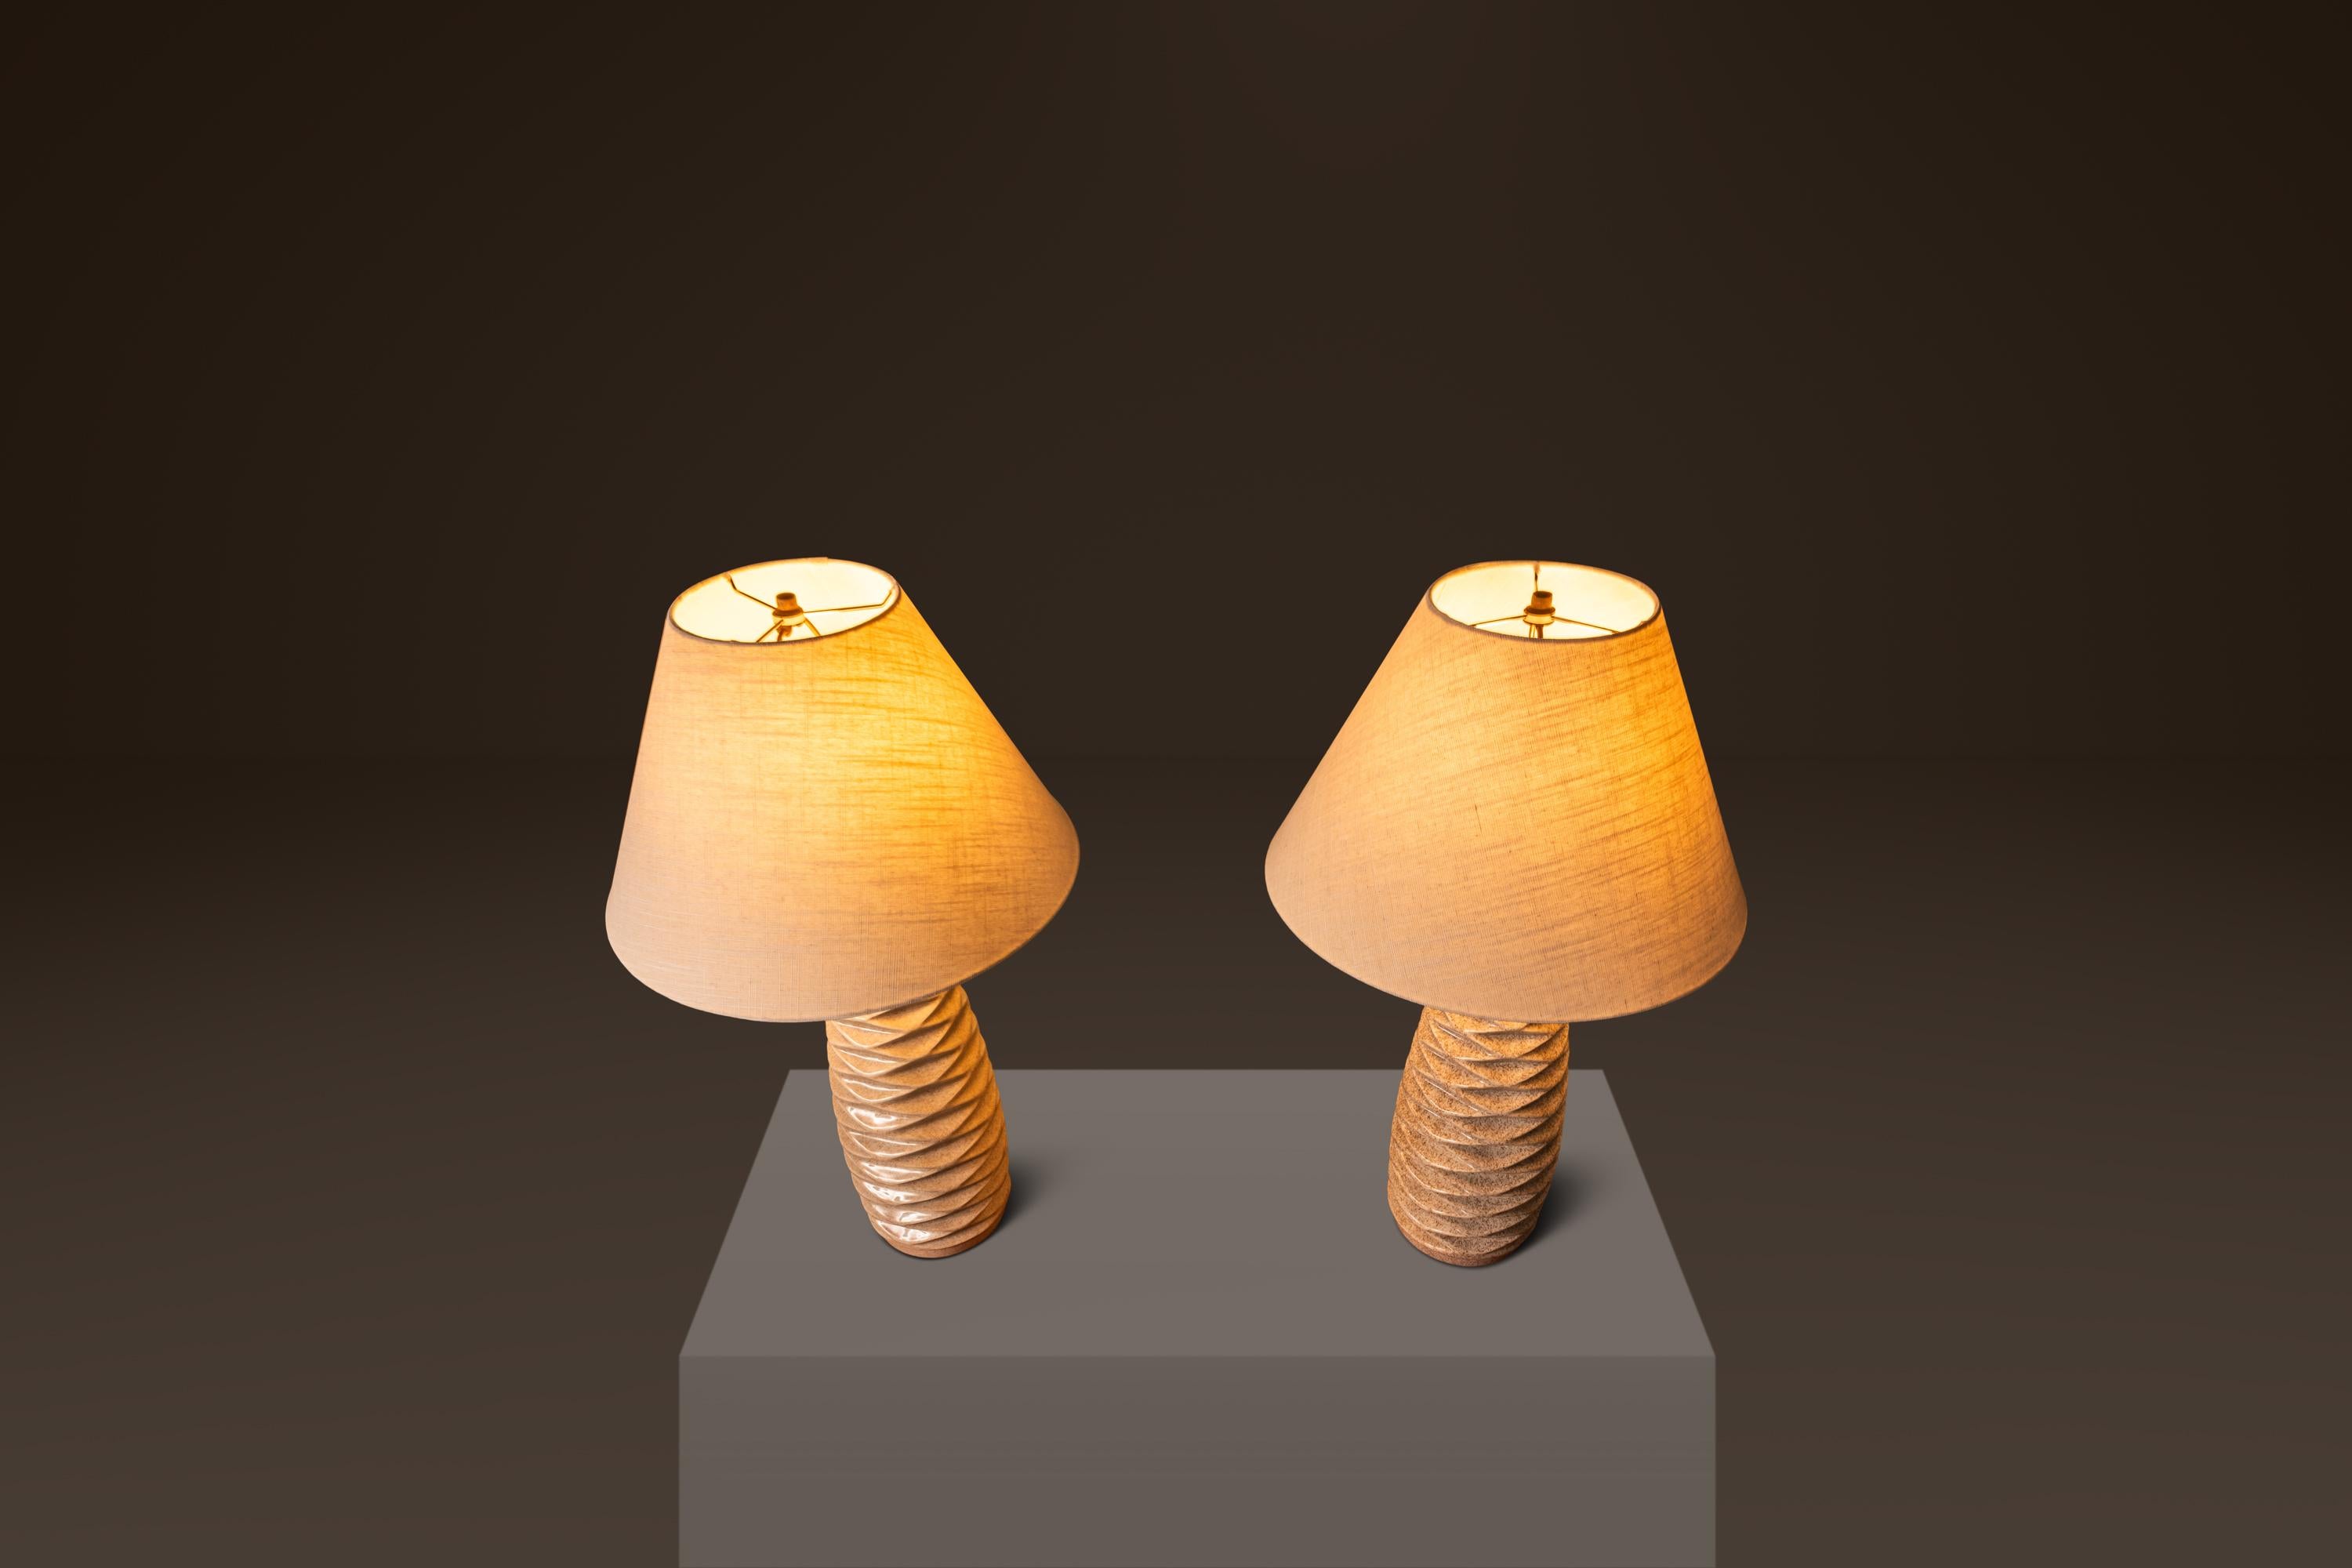 Set of Two ( 2 ) Mid-Century Modern Ceramic Table Lamps w/ Walnut Necks, 1960's For Sale 5